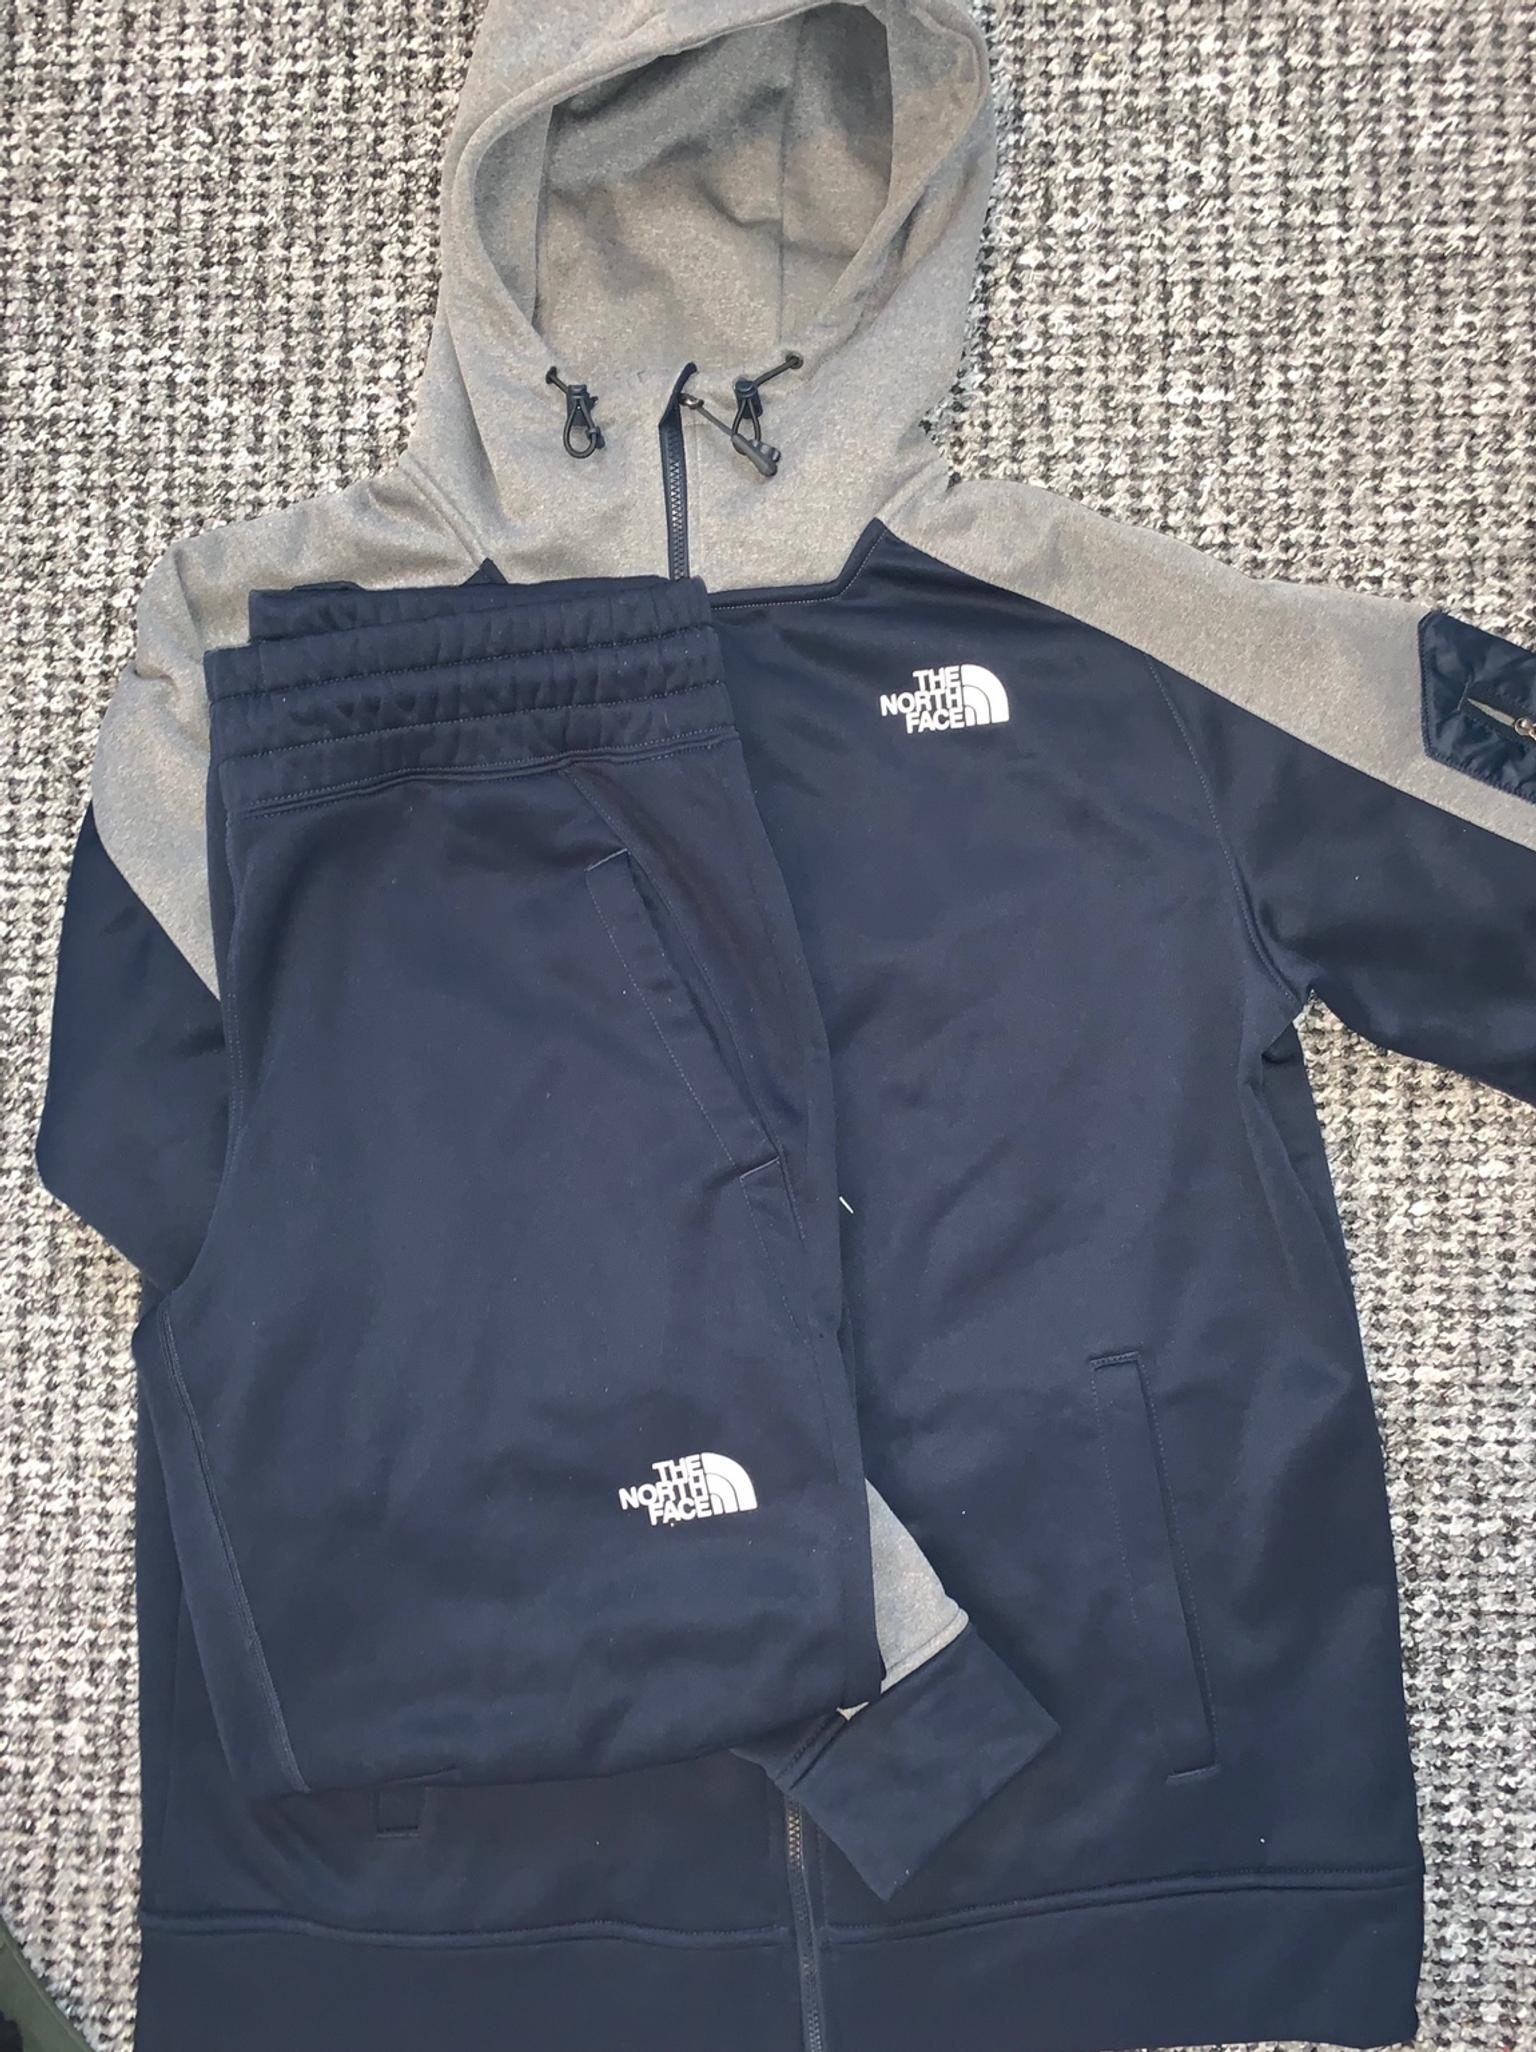 north face tracksuits for sale